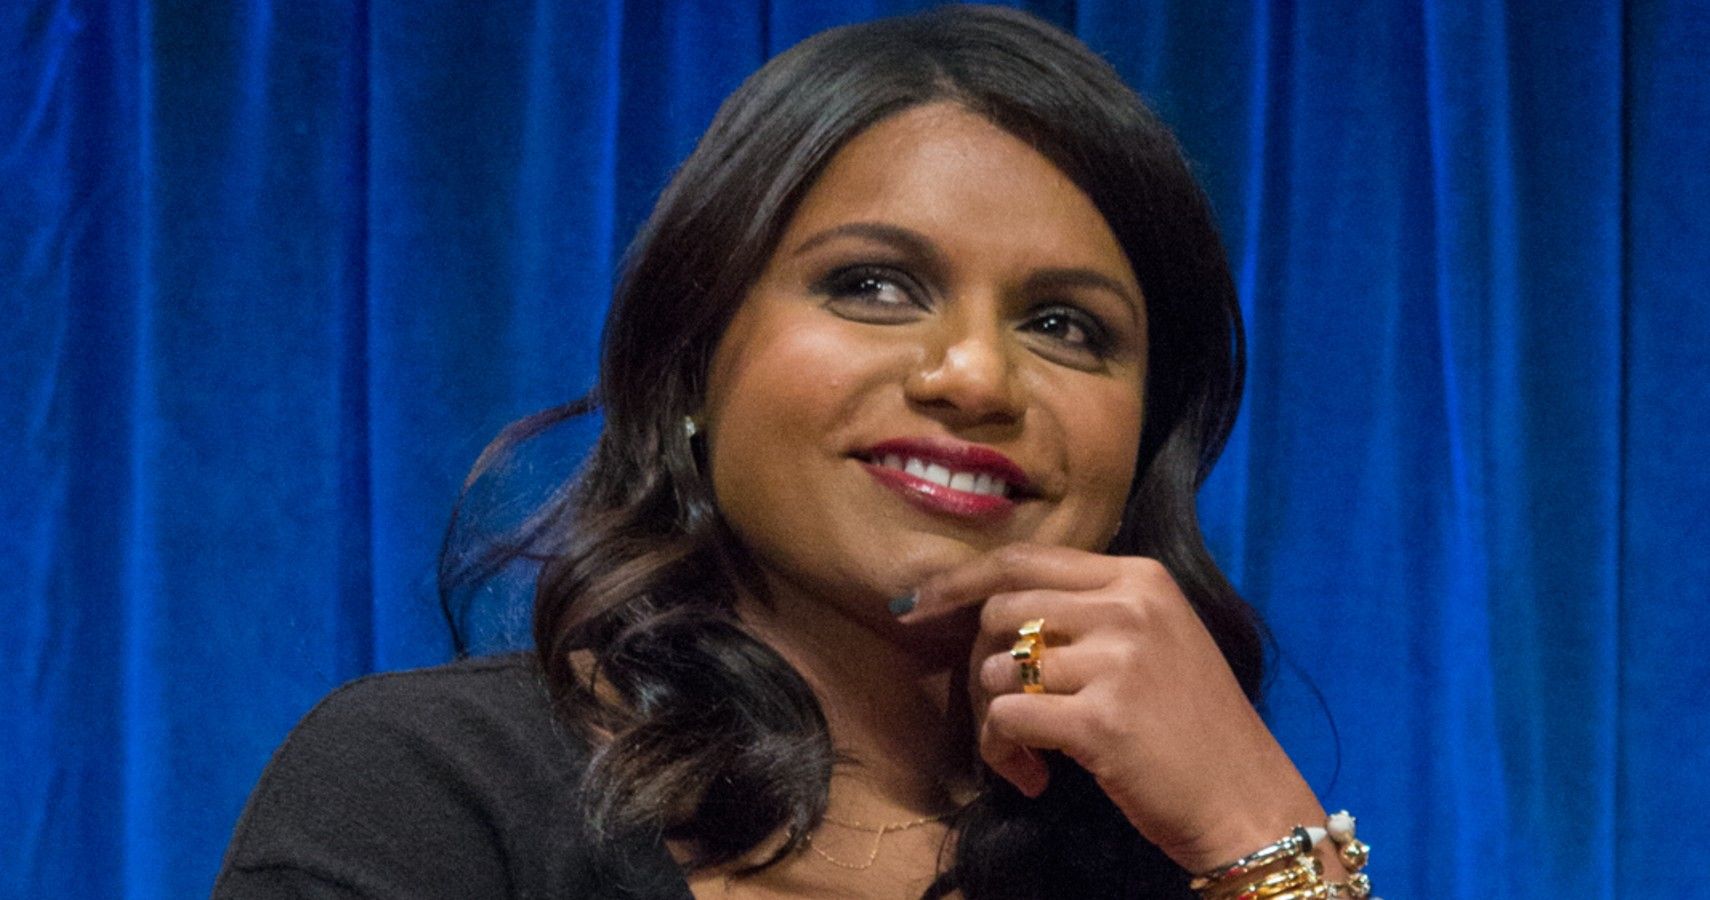 Mindy Kaling Shares Cute Video Of Son On His Birthday